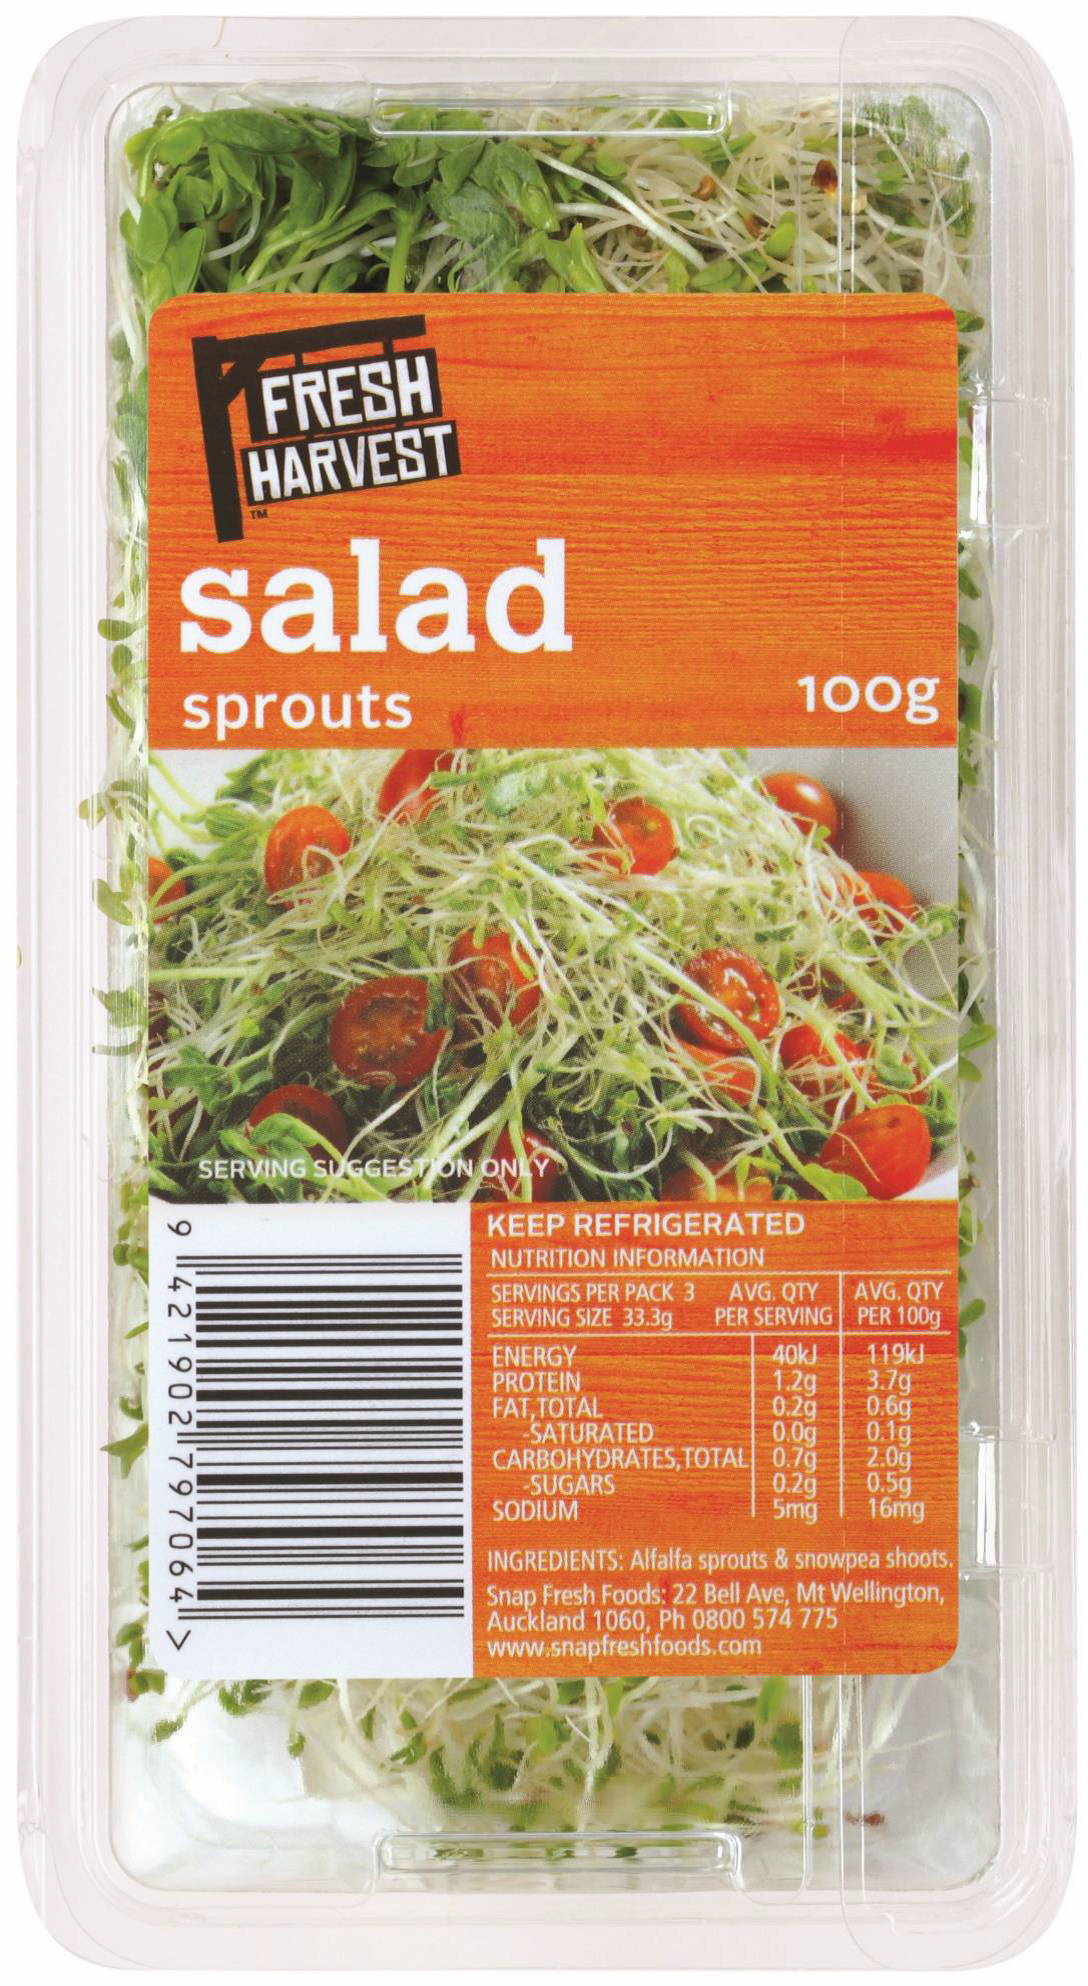 Fresh Harvest Salad Sprouts (100g)